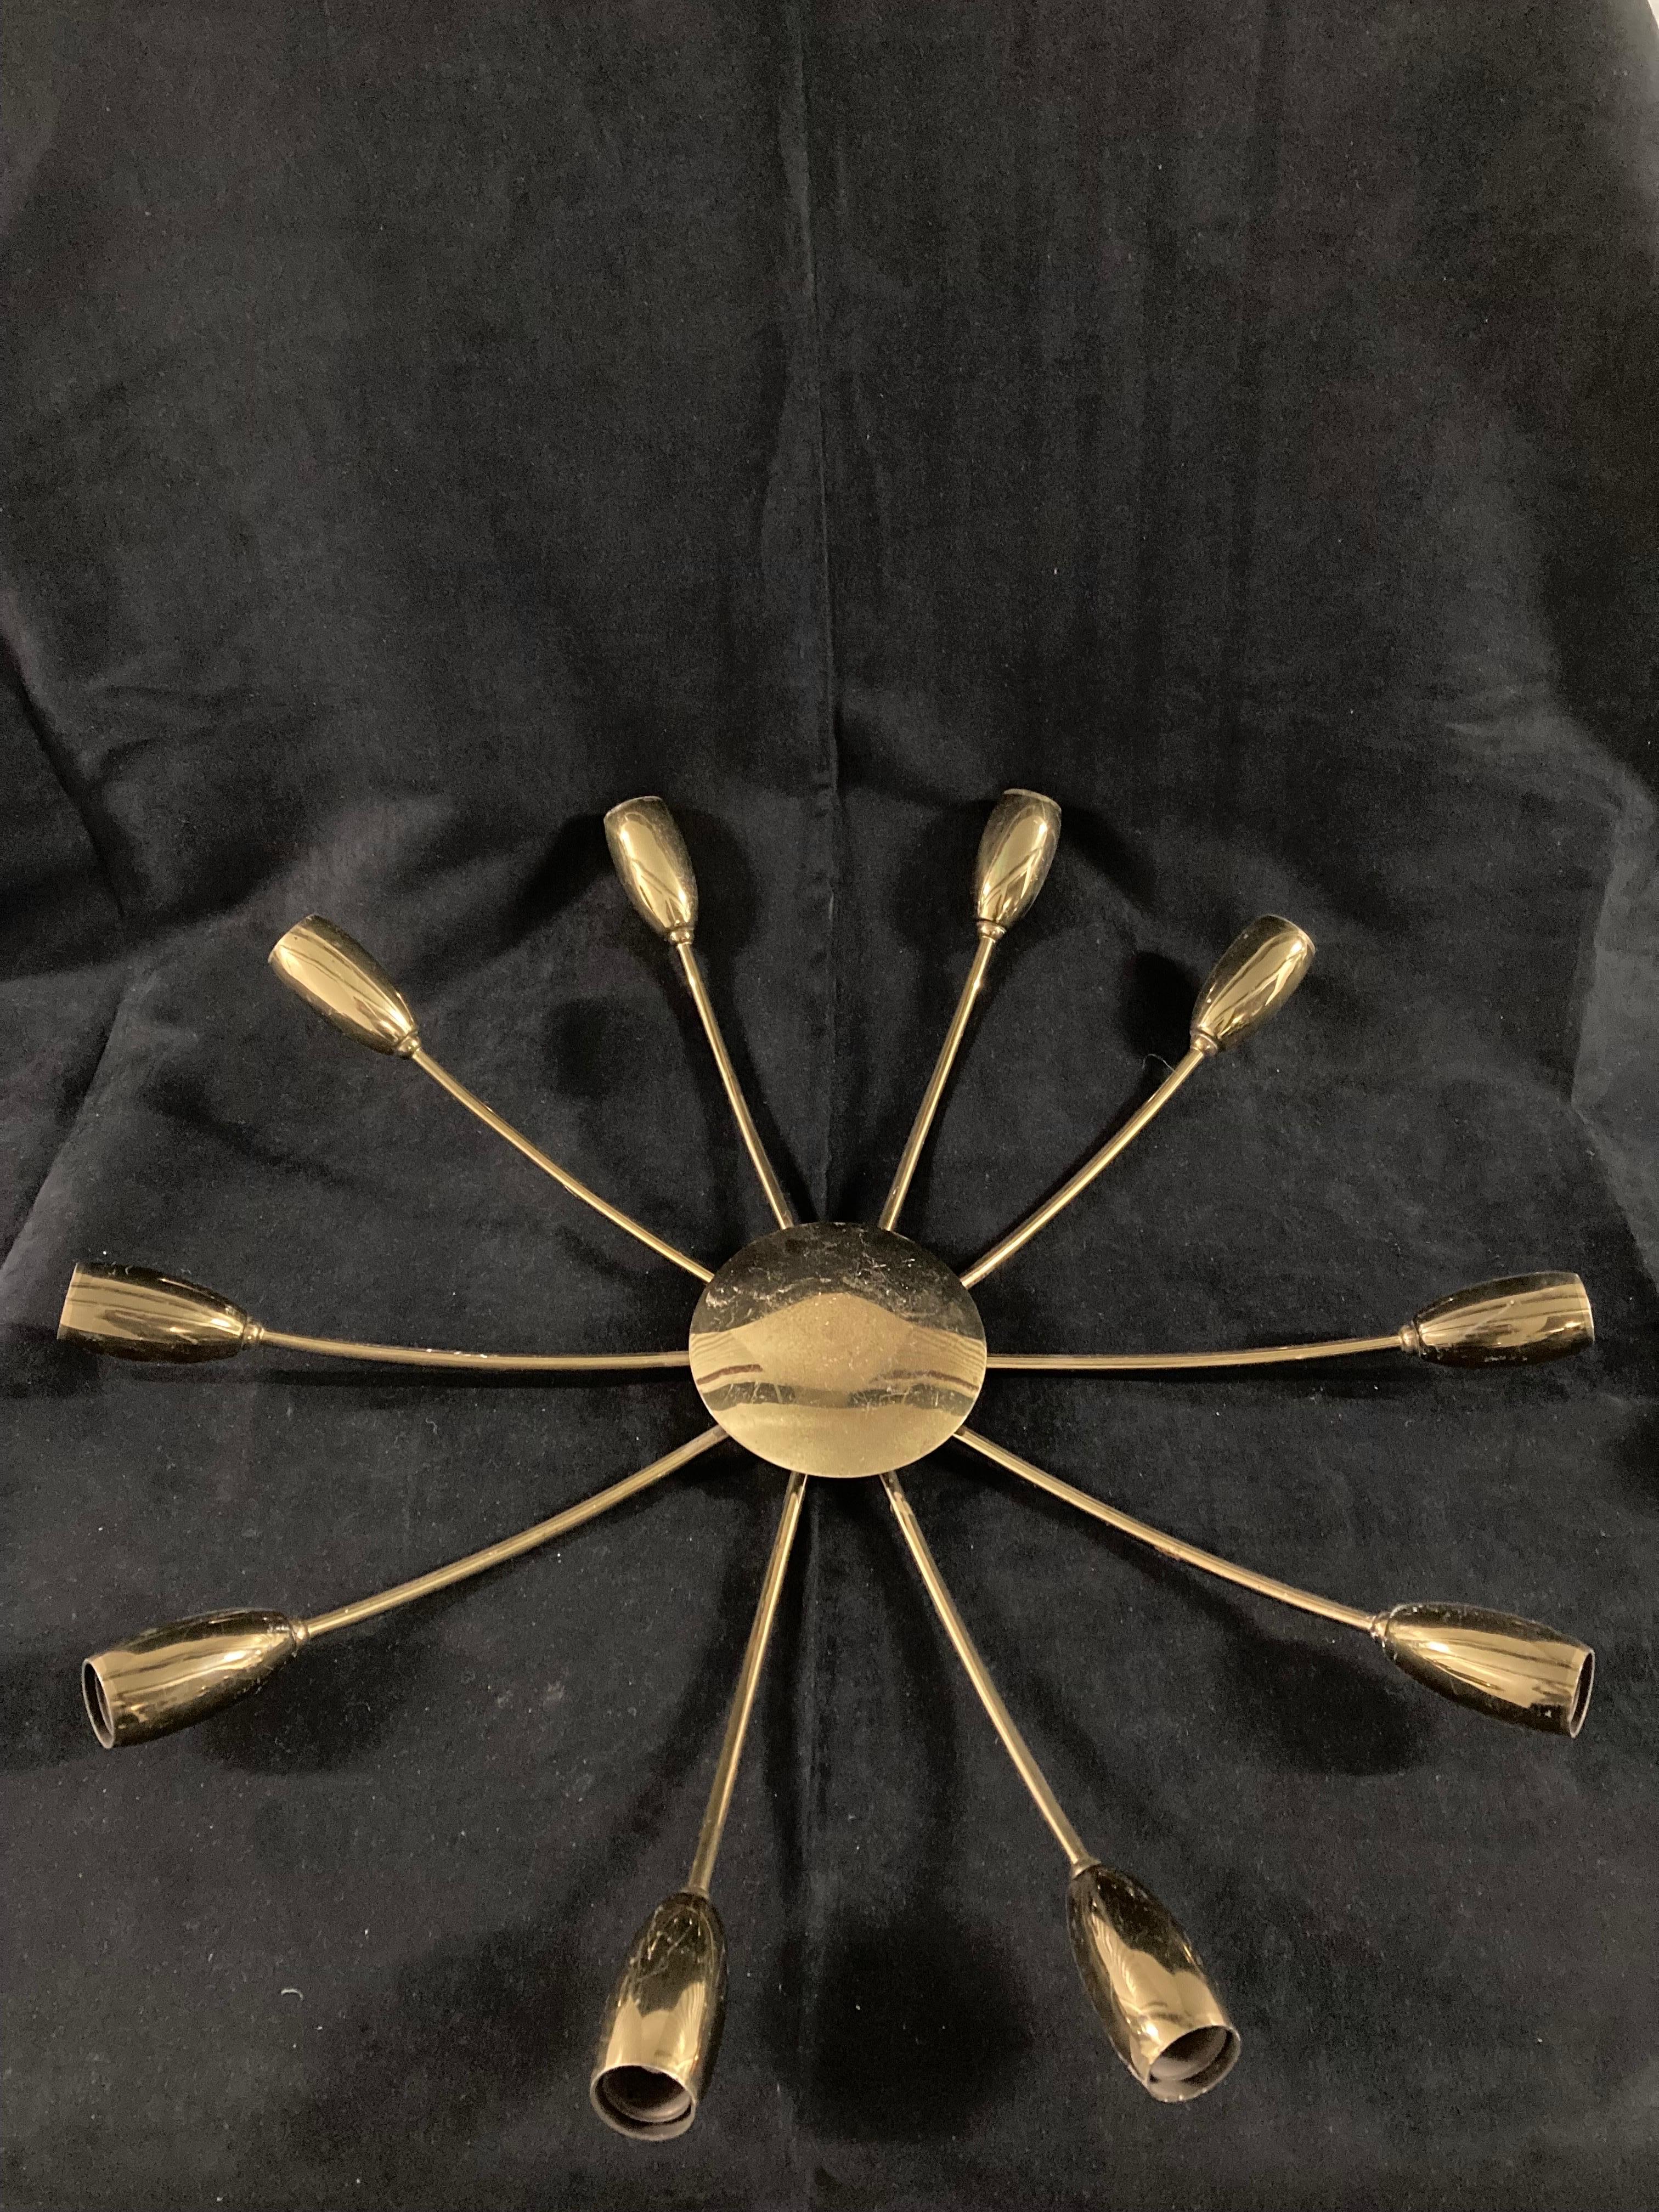 1960s Italian Starburst Wall or Ceiling Light Attributed to Stilnovo.

Gilt metal.

Max width 64 cm.
Max depth 12 cm.
Central disc 14 cm wide.

Milanese lighting company Stilnovo was founded in 1946 by Bruno Gatta, and its participation at the Milan